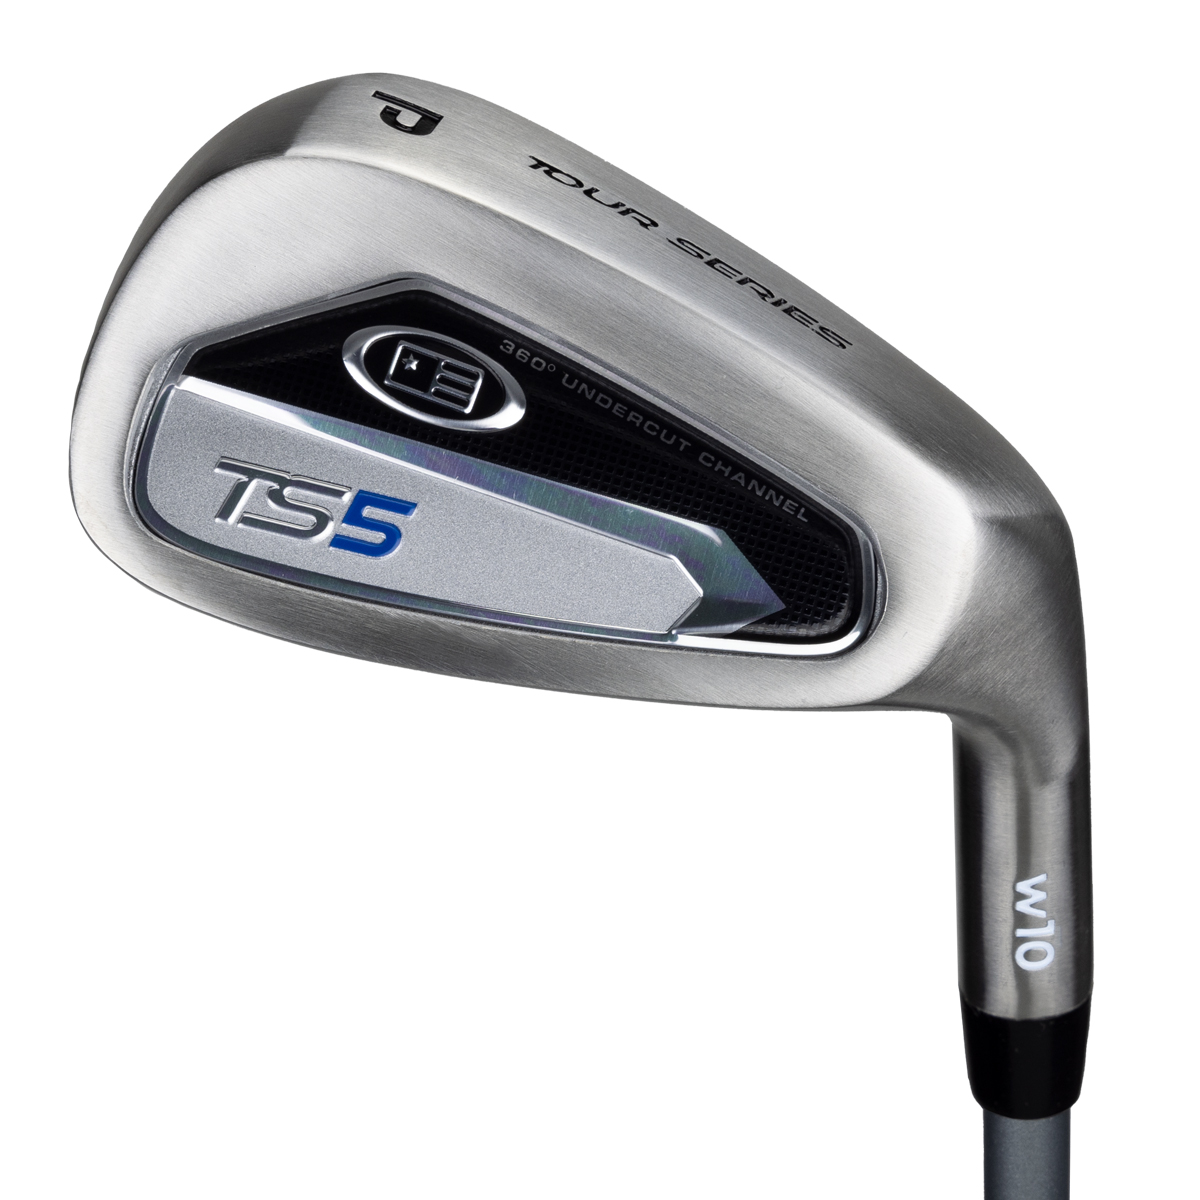 TS5-57  Pitching Wedge, w10 Graphite Shaft